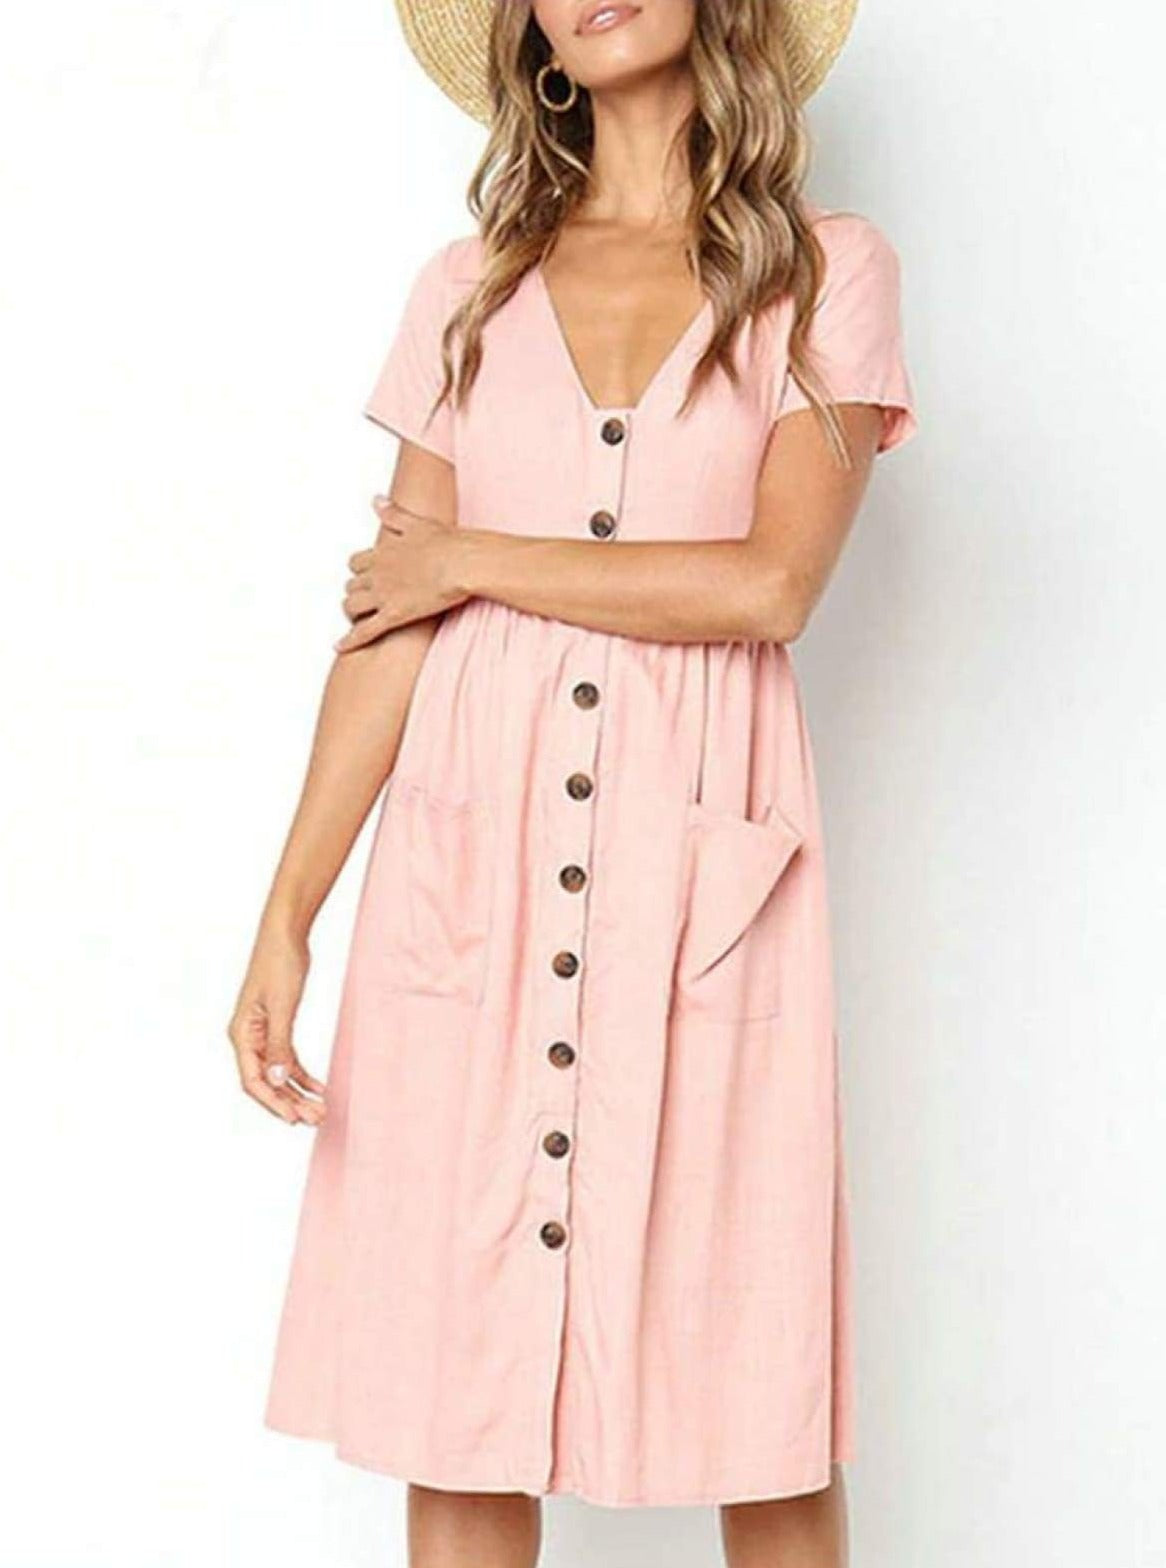 Womens Button Down Casual Dress With Front Square Pockets - Womens Dresses